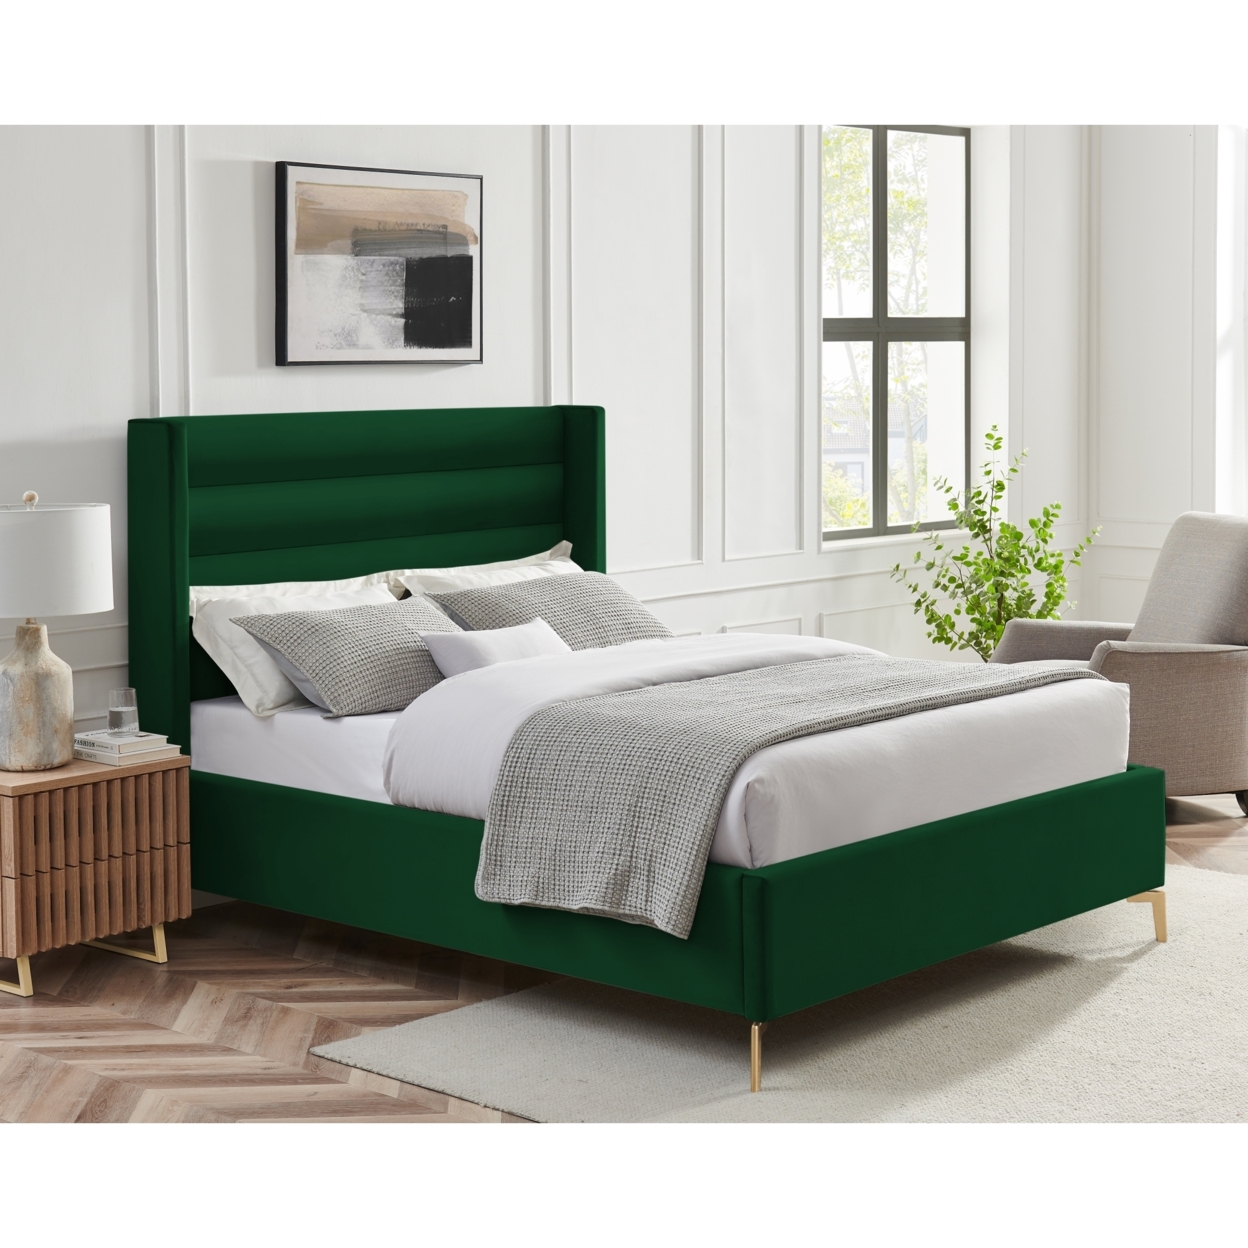 Rayce Bed -Velvet Upholstered, Wingback Channel Tufted Headboard, Oblique Legs, Slats Included - Green, Queen